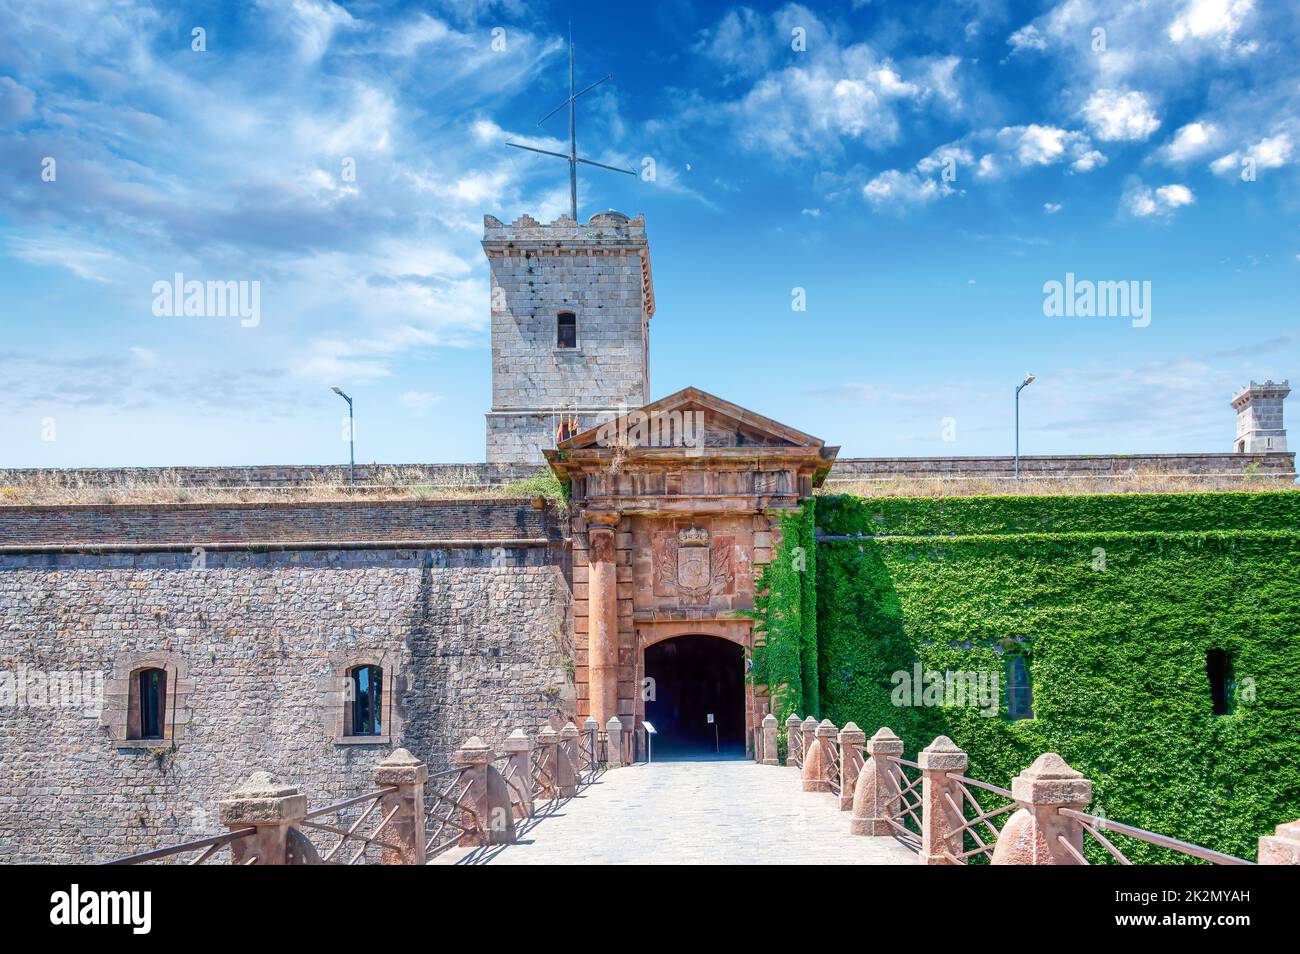 Montjuic Castle or Fort. Symmetric view of the building entrance. Stock Photo